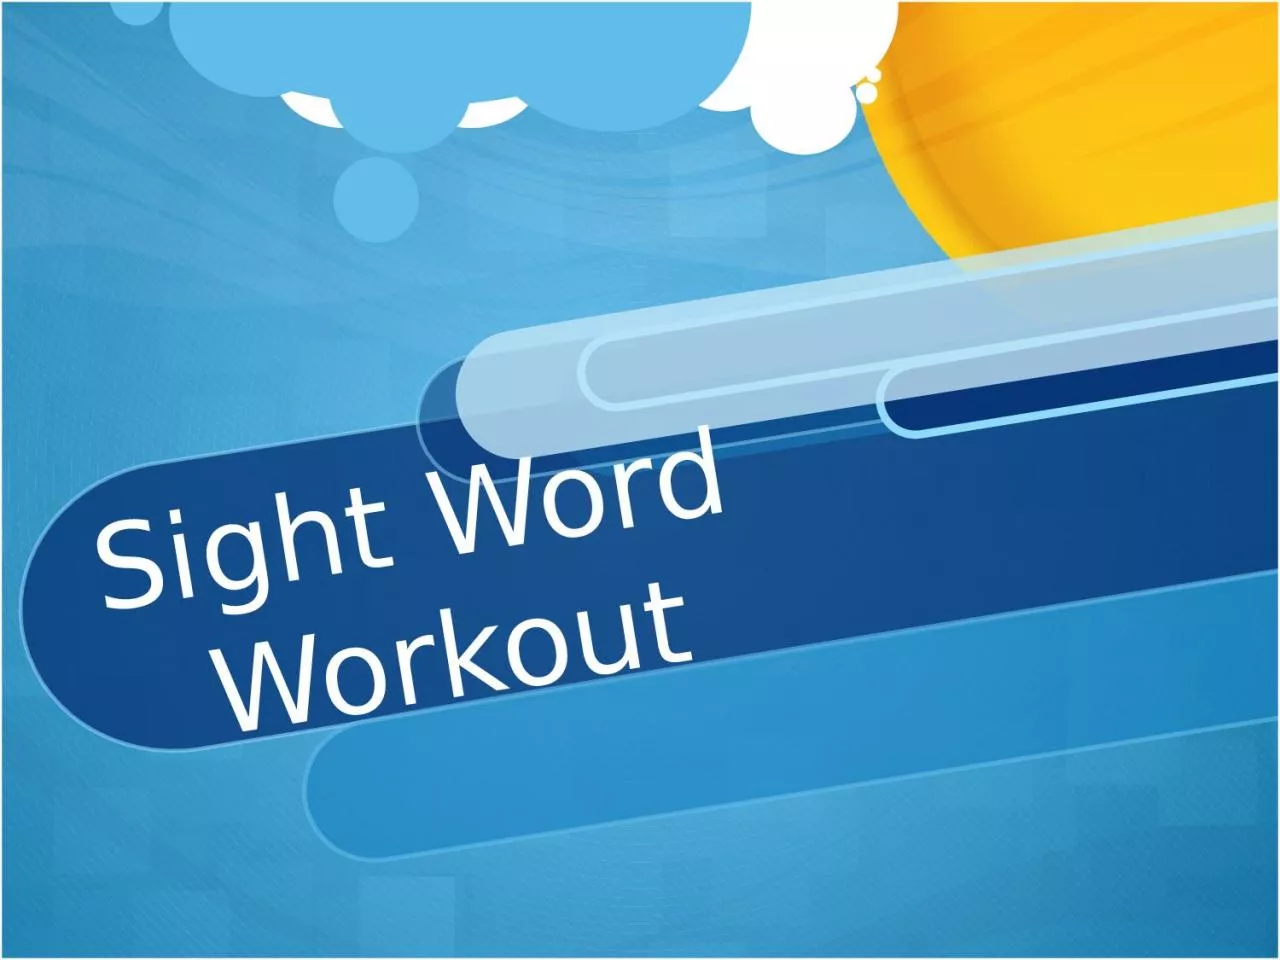 Sight Word  Workout Directions